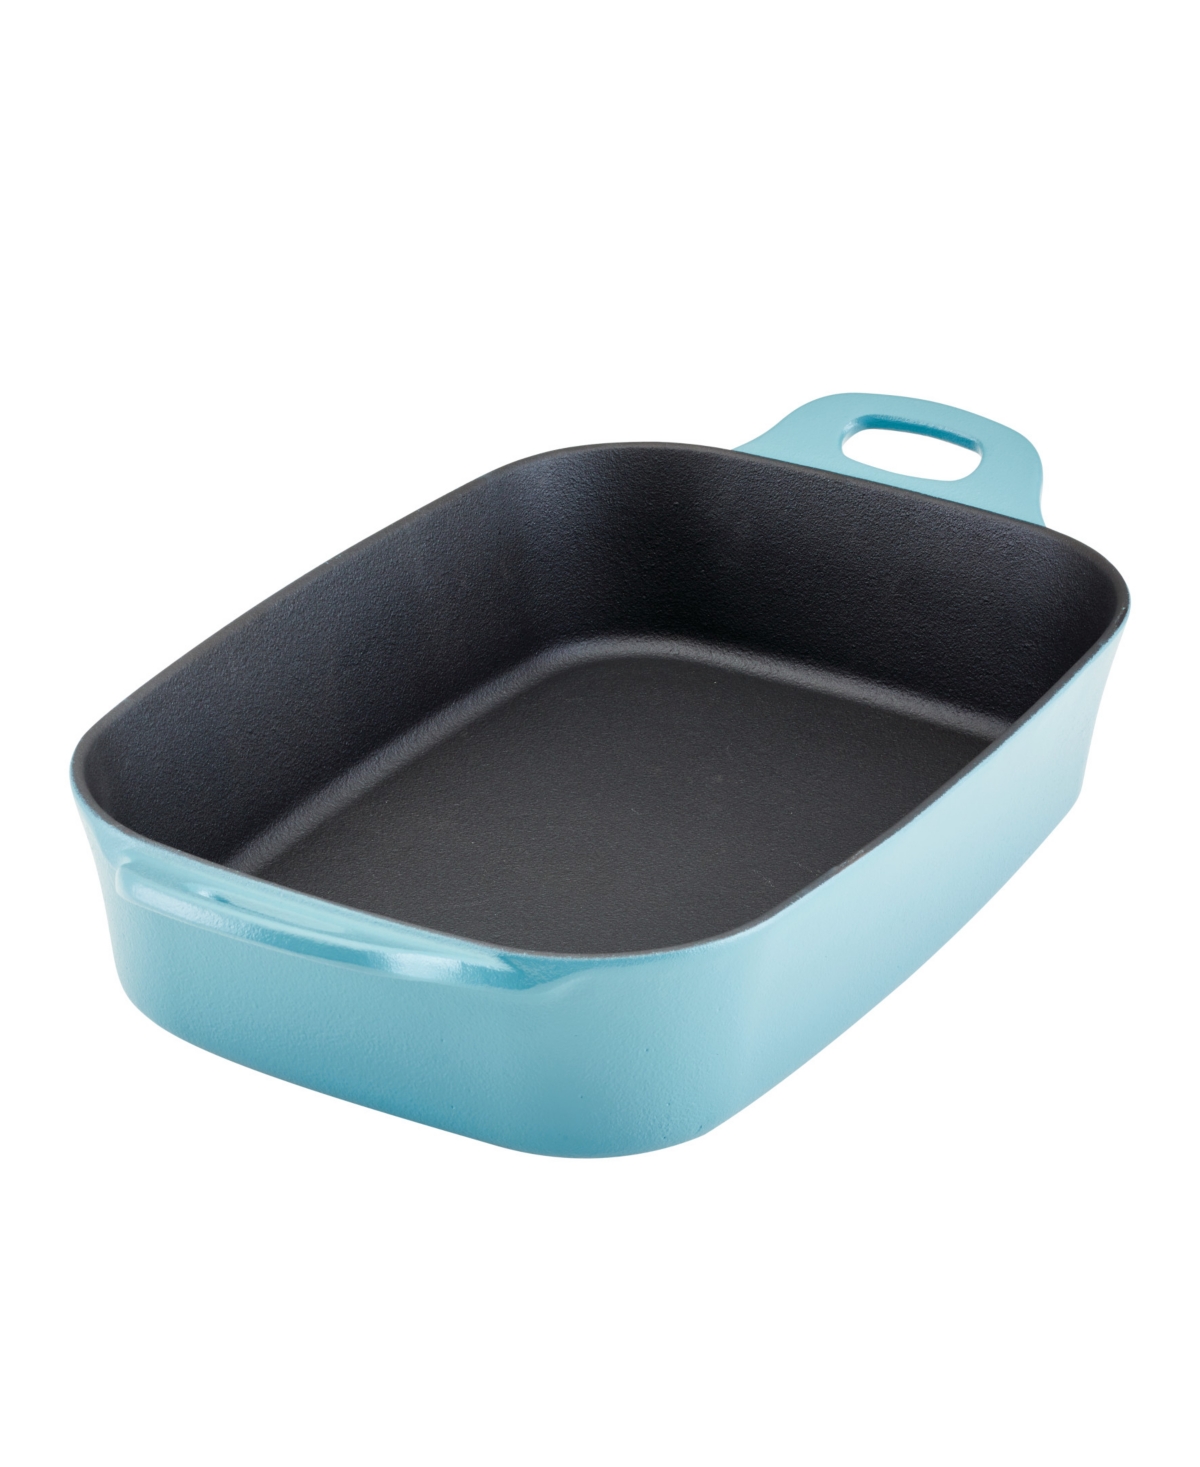 Rachael Ray Nitro Cast Iron 9-inch X 13-inch Roasting Pan In Agave Blue